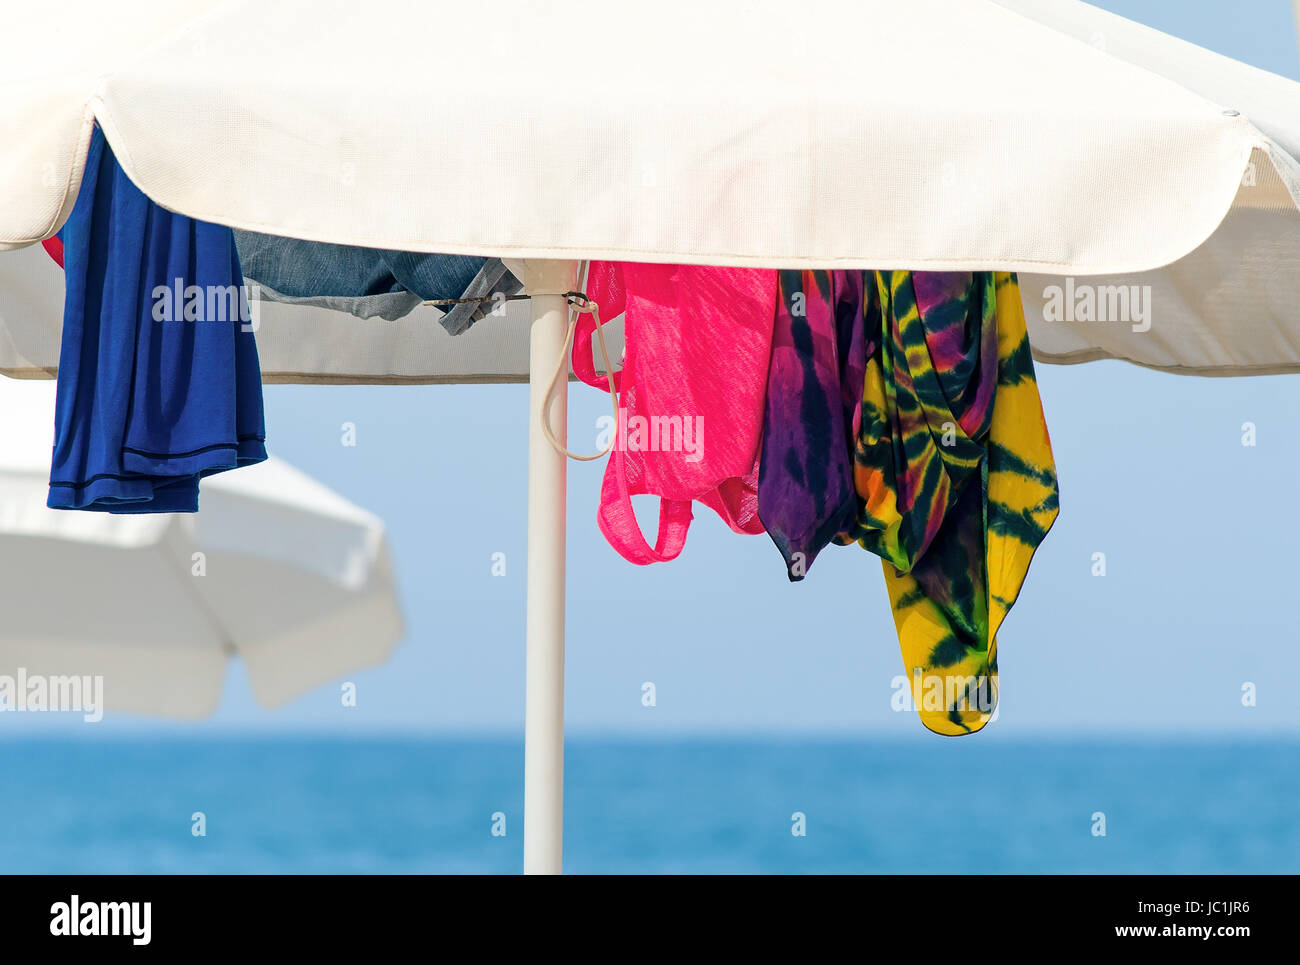 White umbrellas for protection against the sun on a sea beach and the clothes hidden under them. Stock Photo